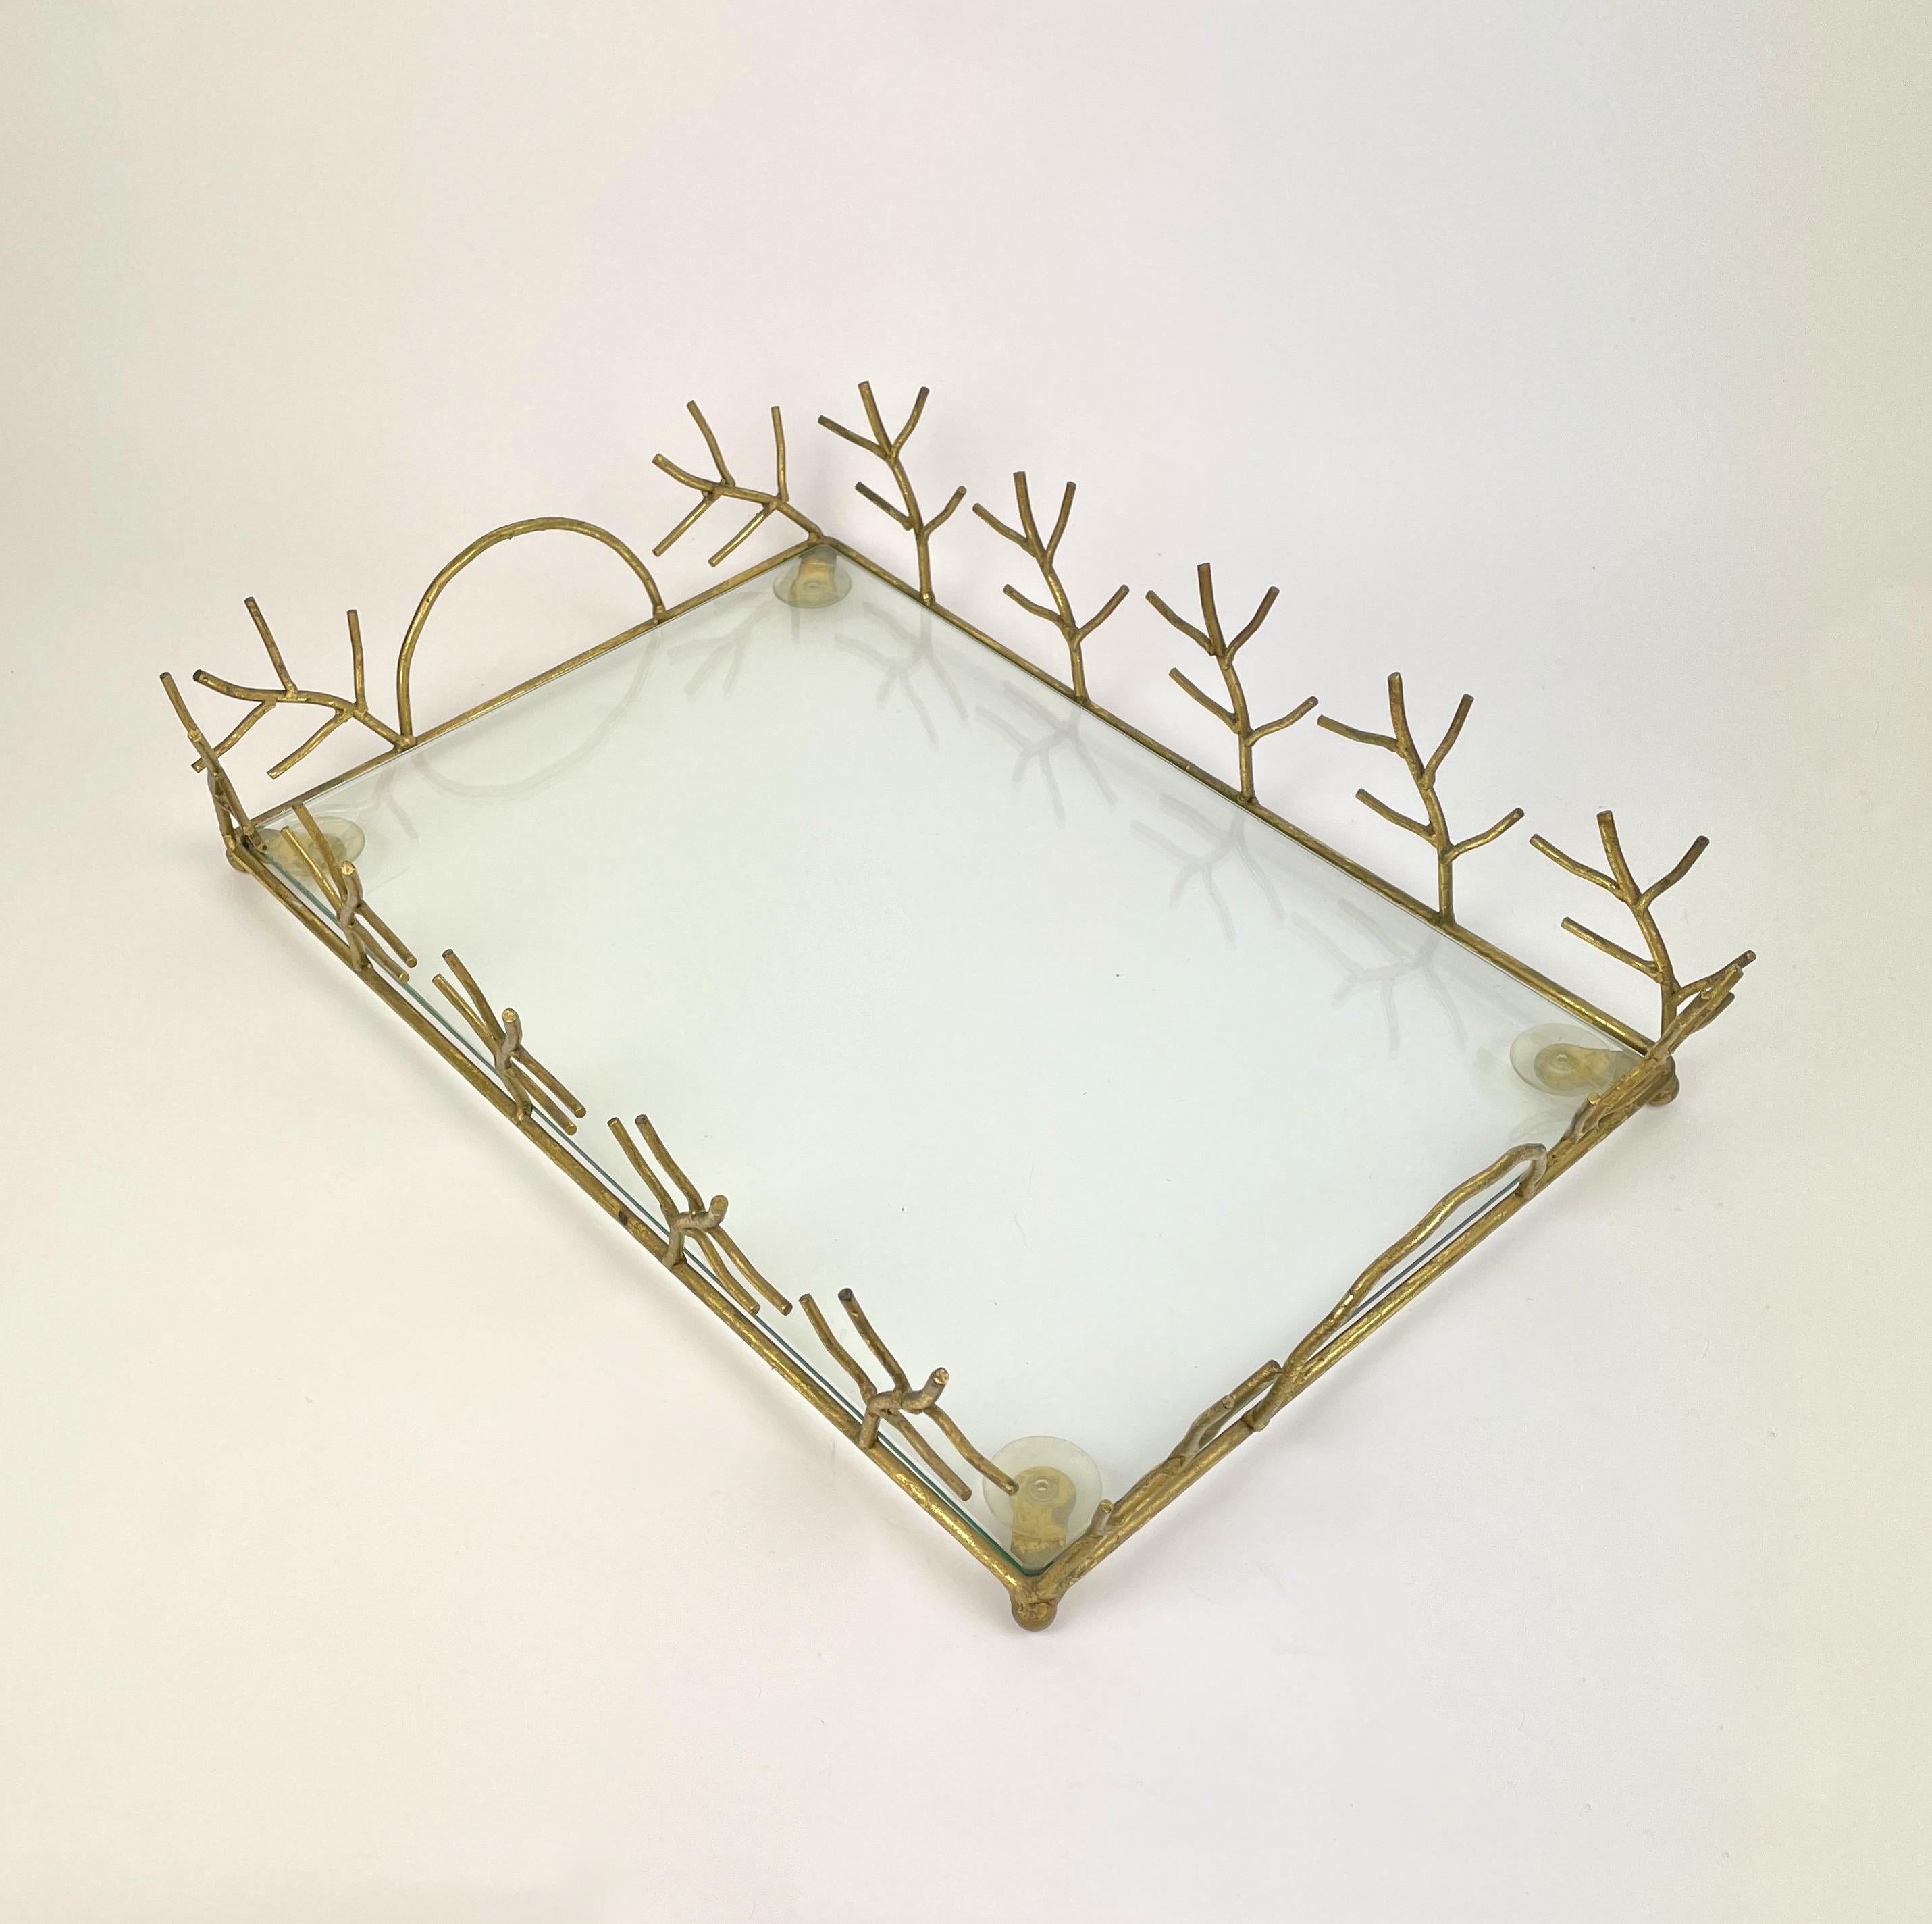 Mid-Century Modern Serving Tray in Glass and Golden Metal Branches Maison Baguès Style France 1970s For Sale